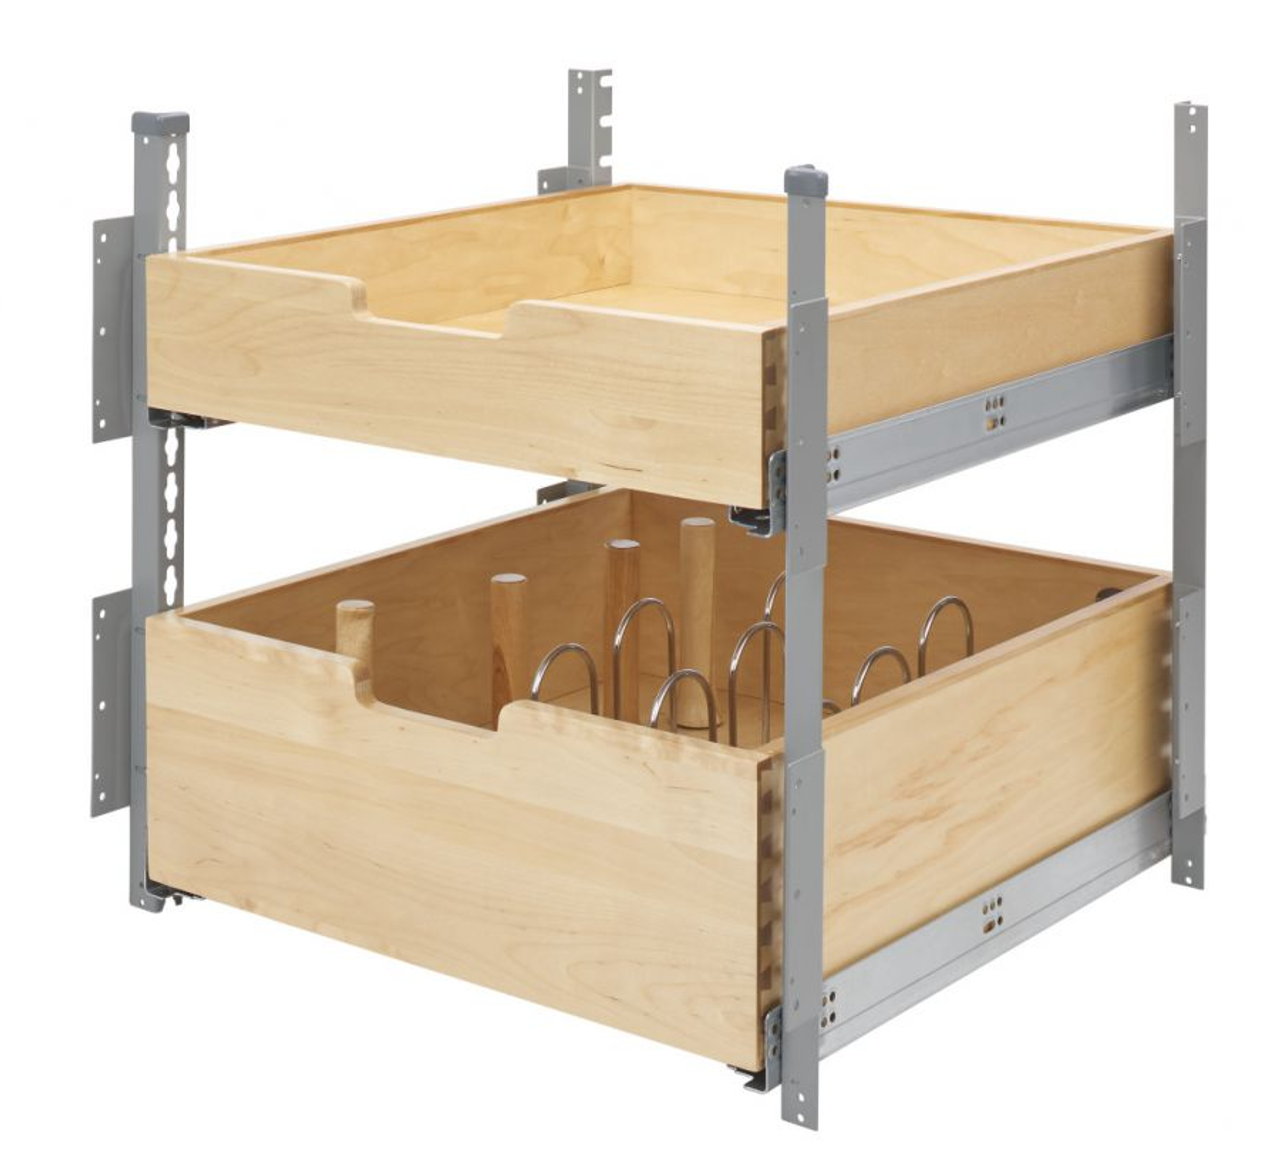 Rev-a-shelf Natural Maple Pilaster Kit w/ BLUMOTION Soft-Close for 24" Drawer/Door Base (1) Standard, One Tall, Silver Uprights 4PIL-24SC-SV-2